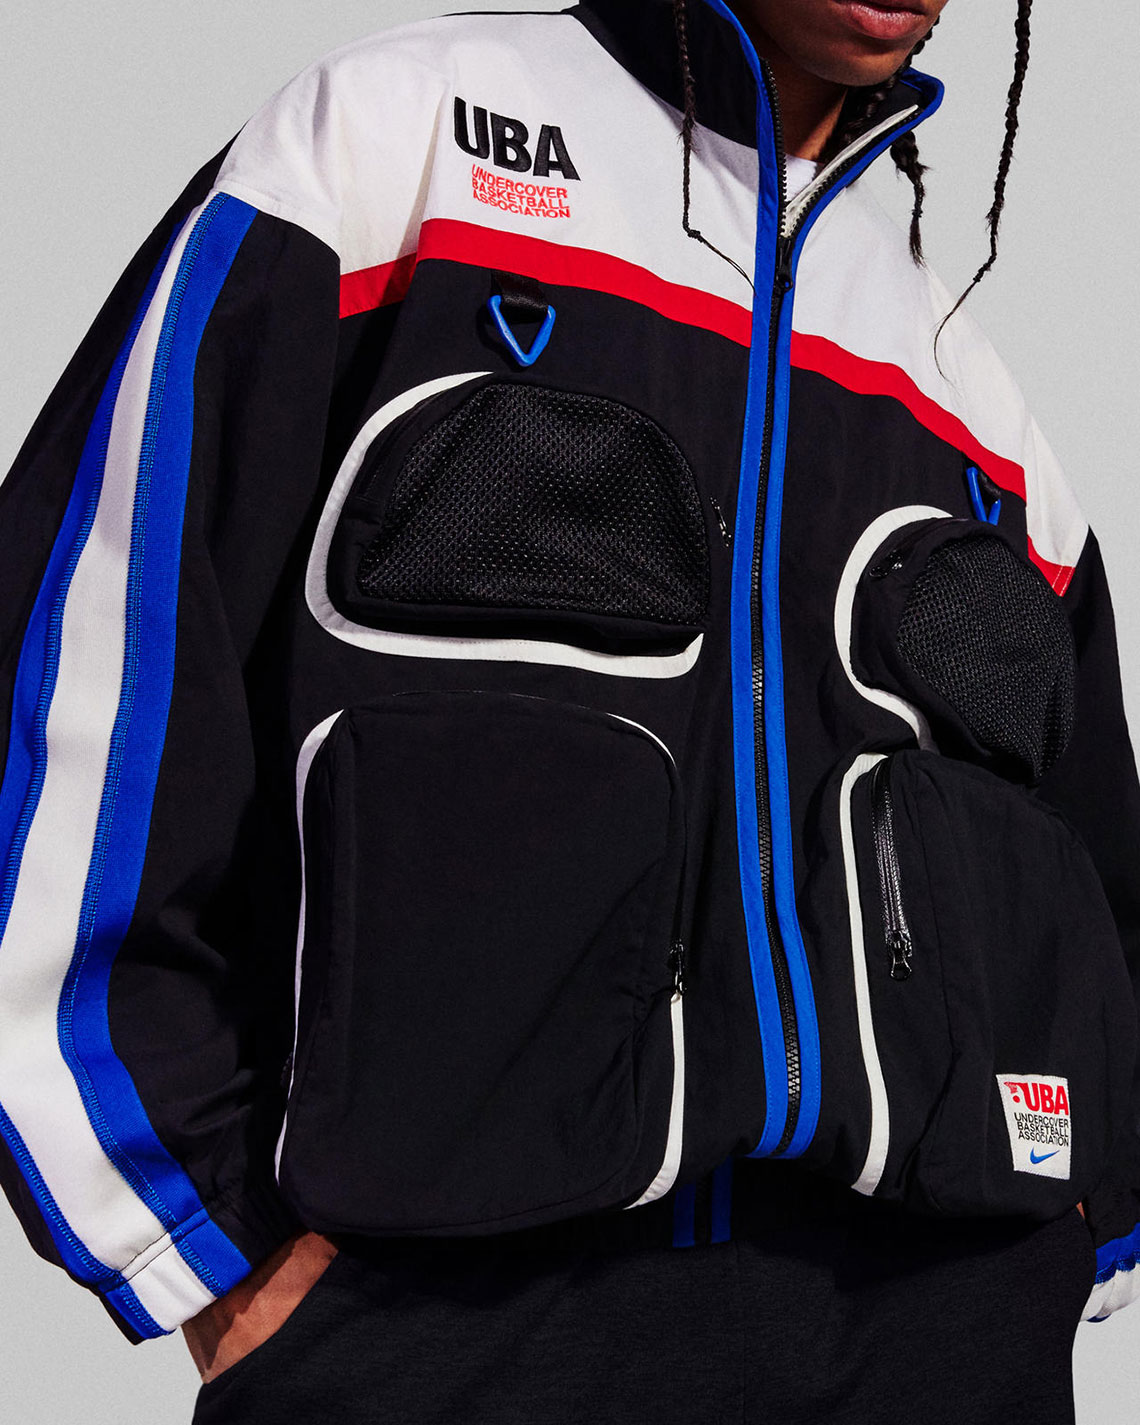 Undercover Nike Apparel Tokyo Olympics 2